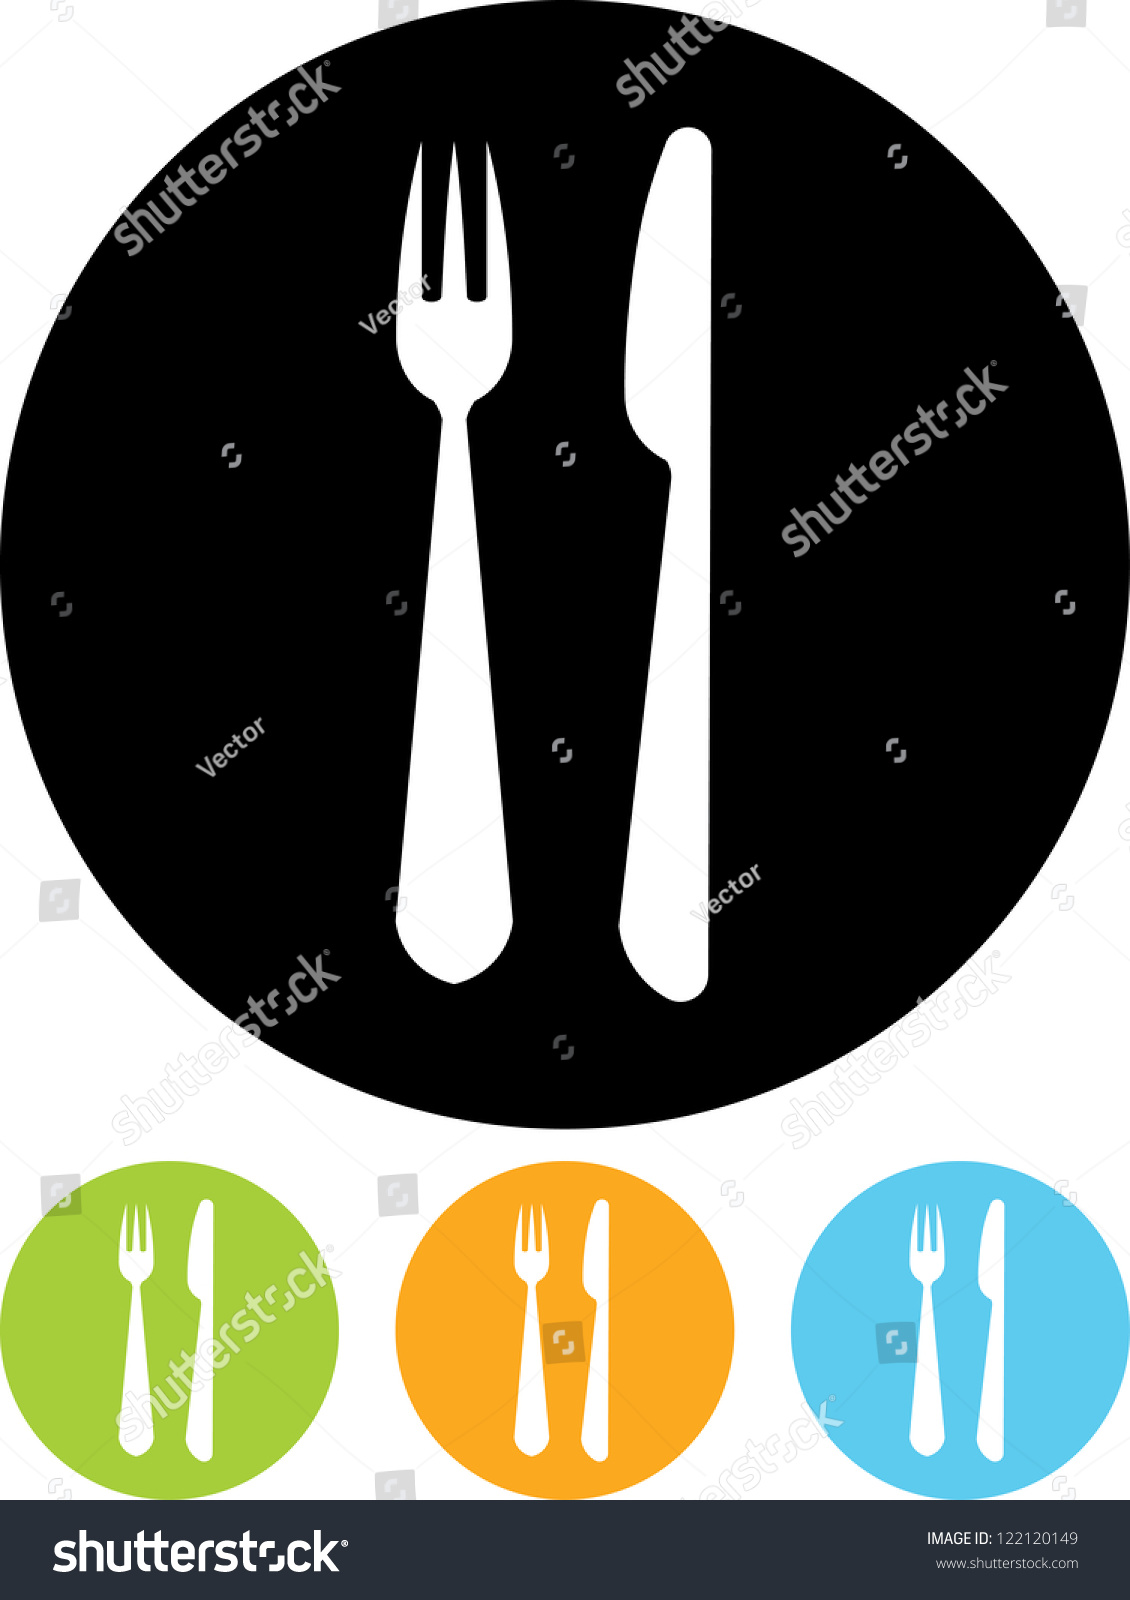 Fork And Knife - Vector Icon Isolated - 122120149 : Shutterstock